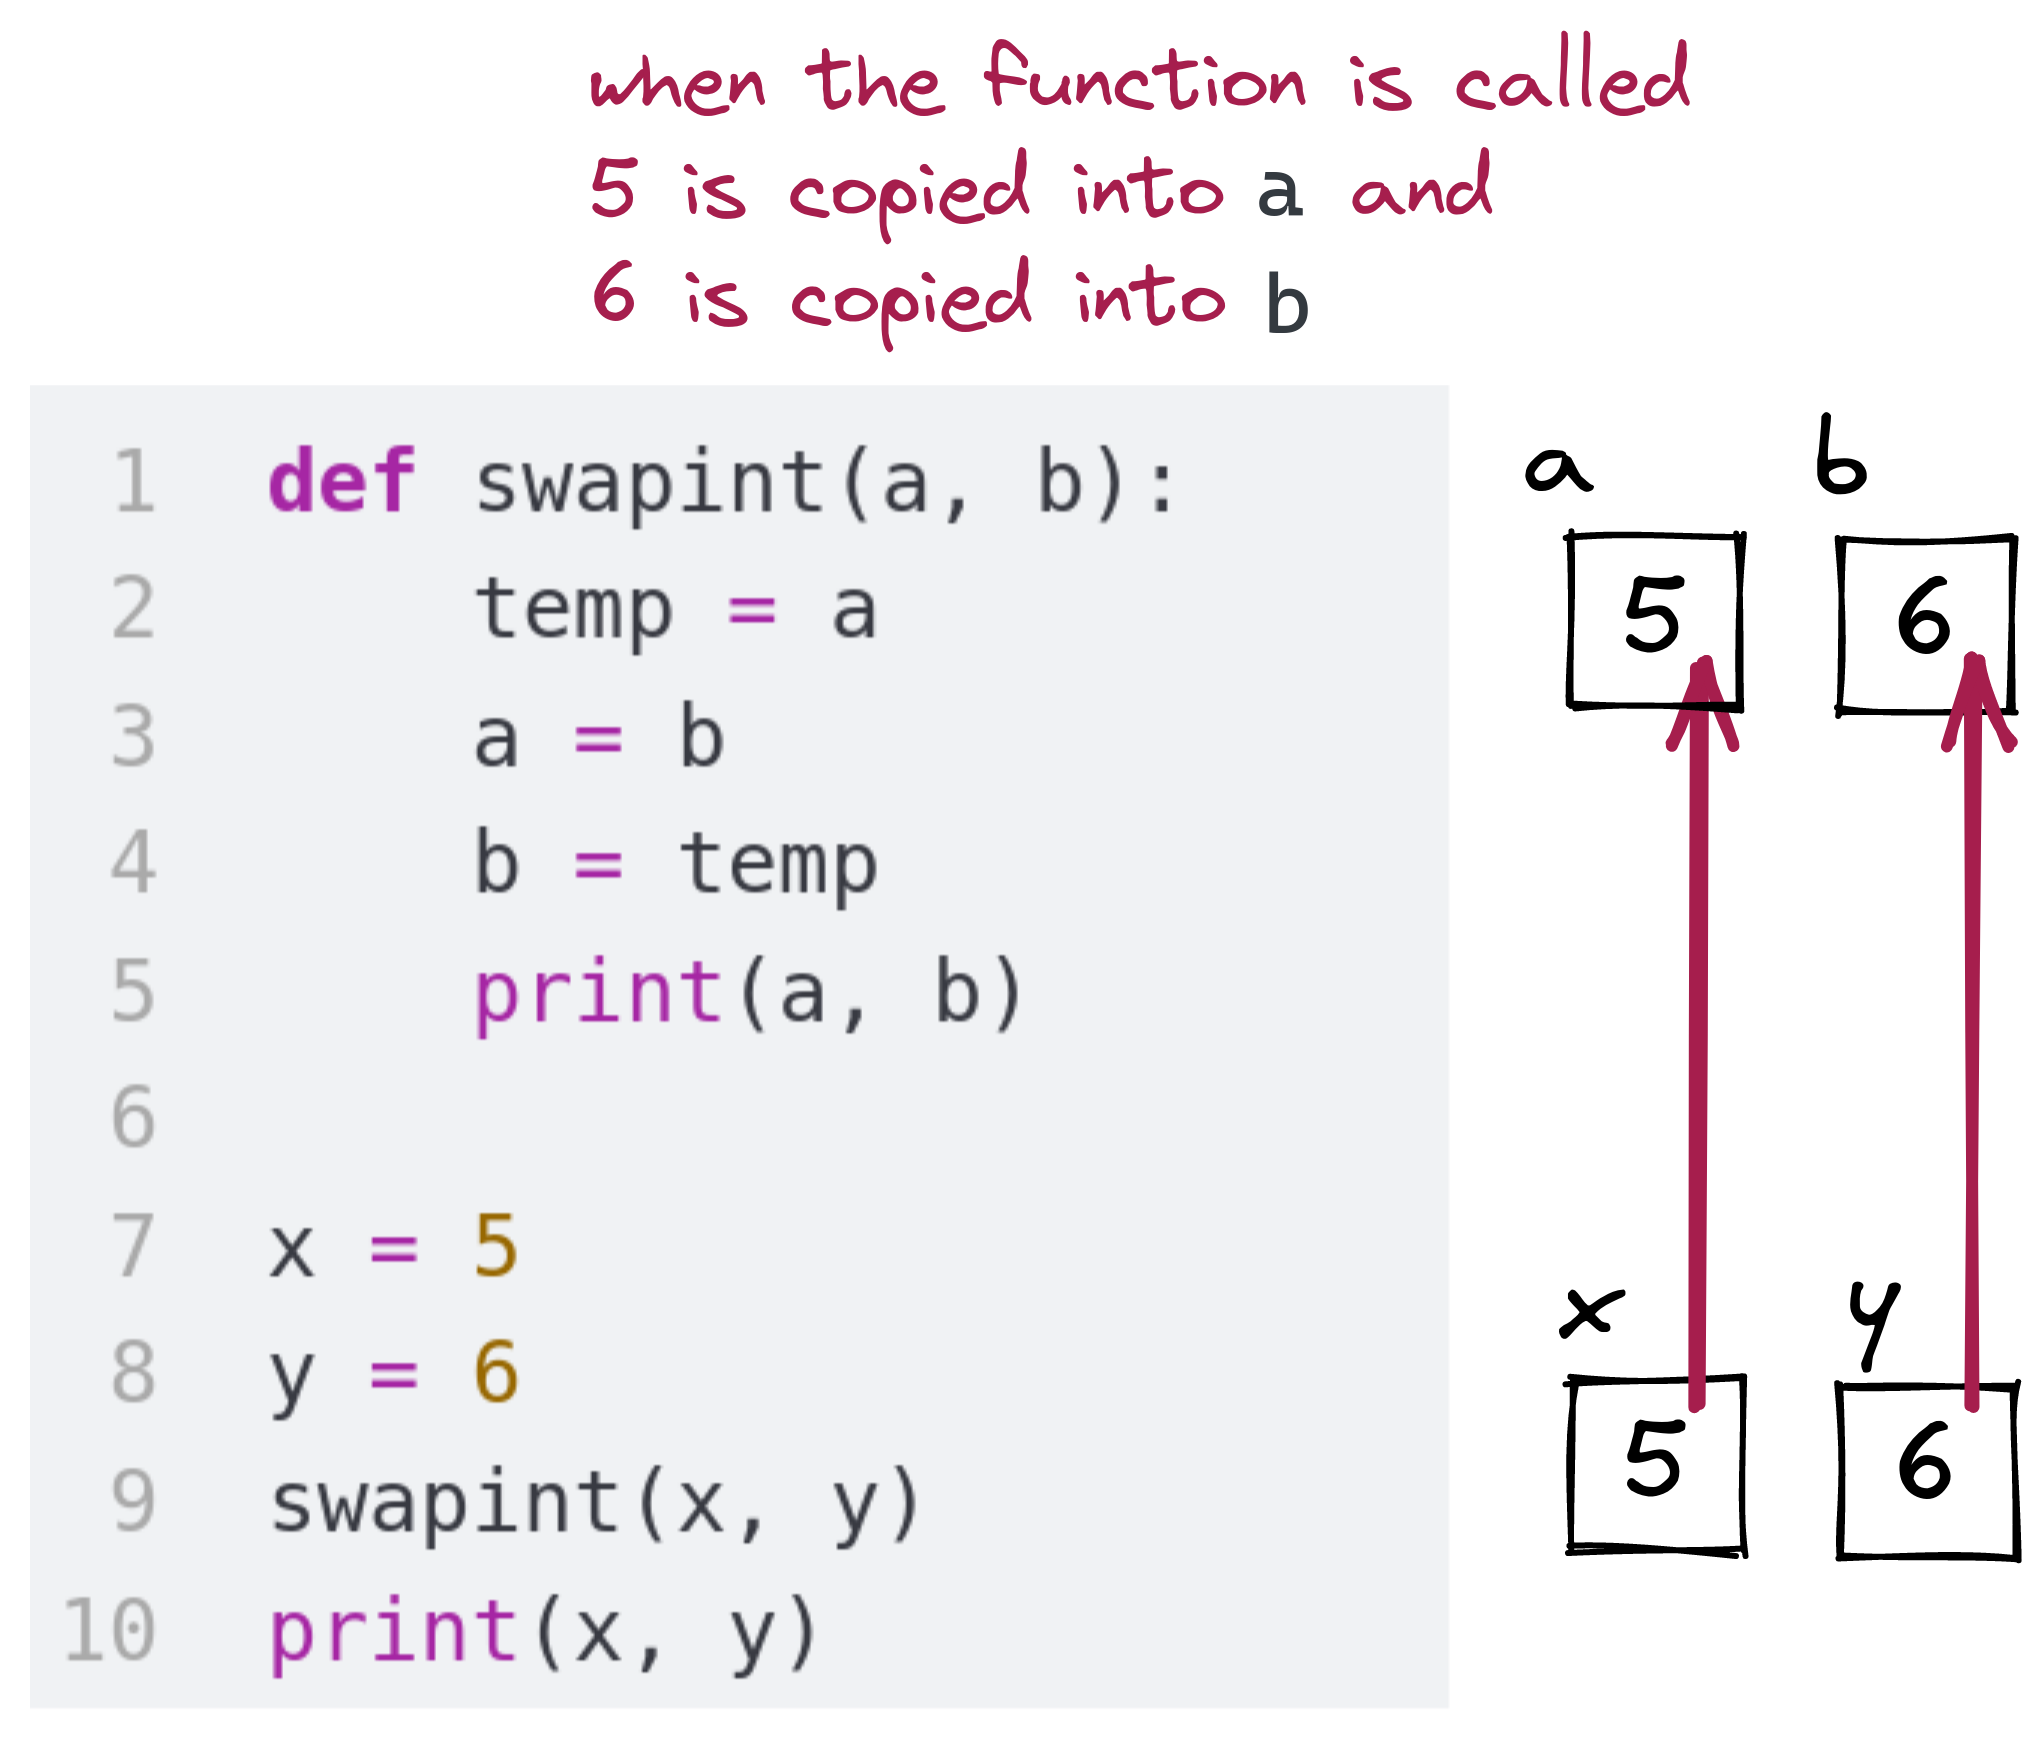 function definition